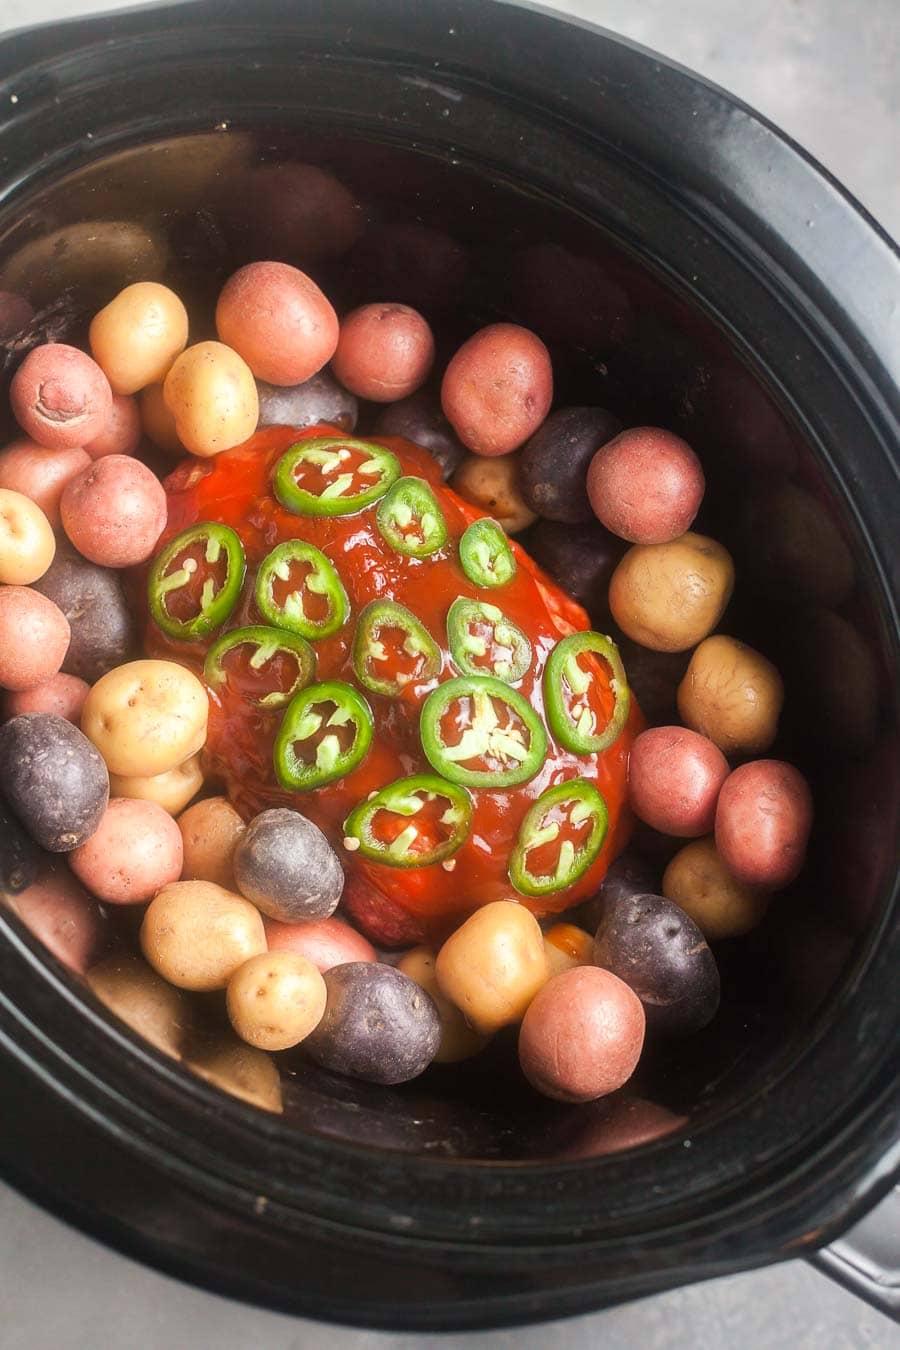 overhead view of the meatloaf and potatoes in a crock pot slow cooker. The meatloaf in the the center and is topped with homemade barbecue sauce and slices chile peppers. Small potatoes surround the meatloaf.